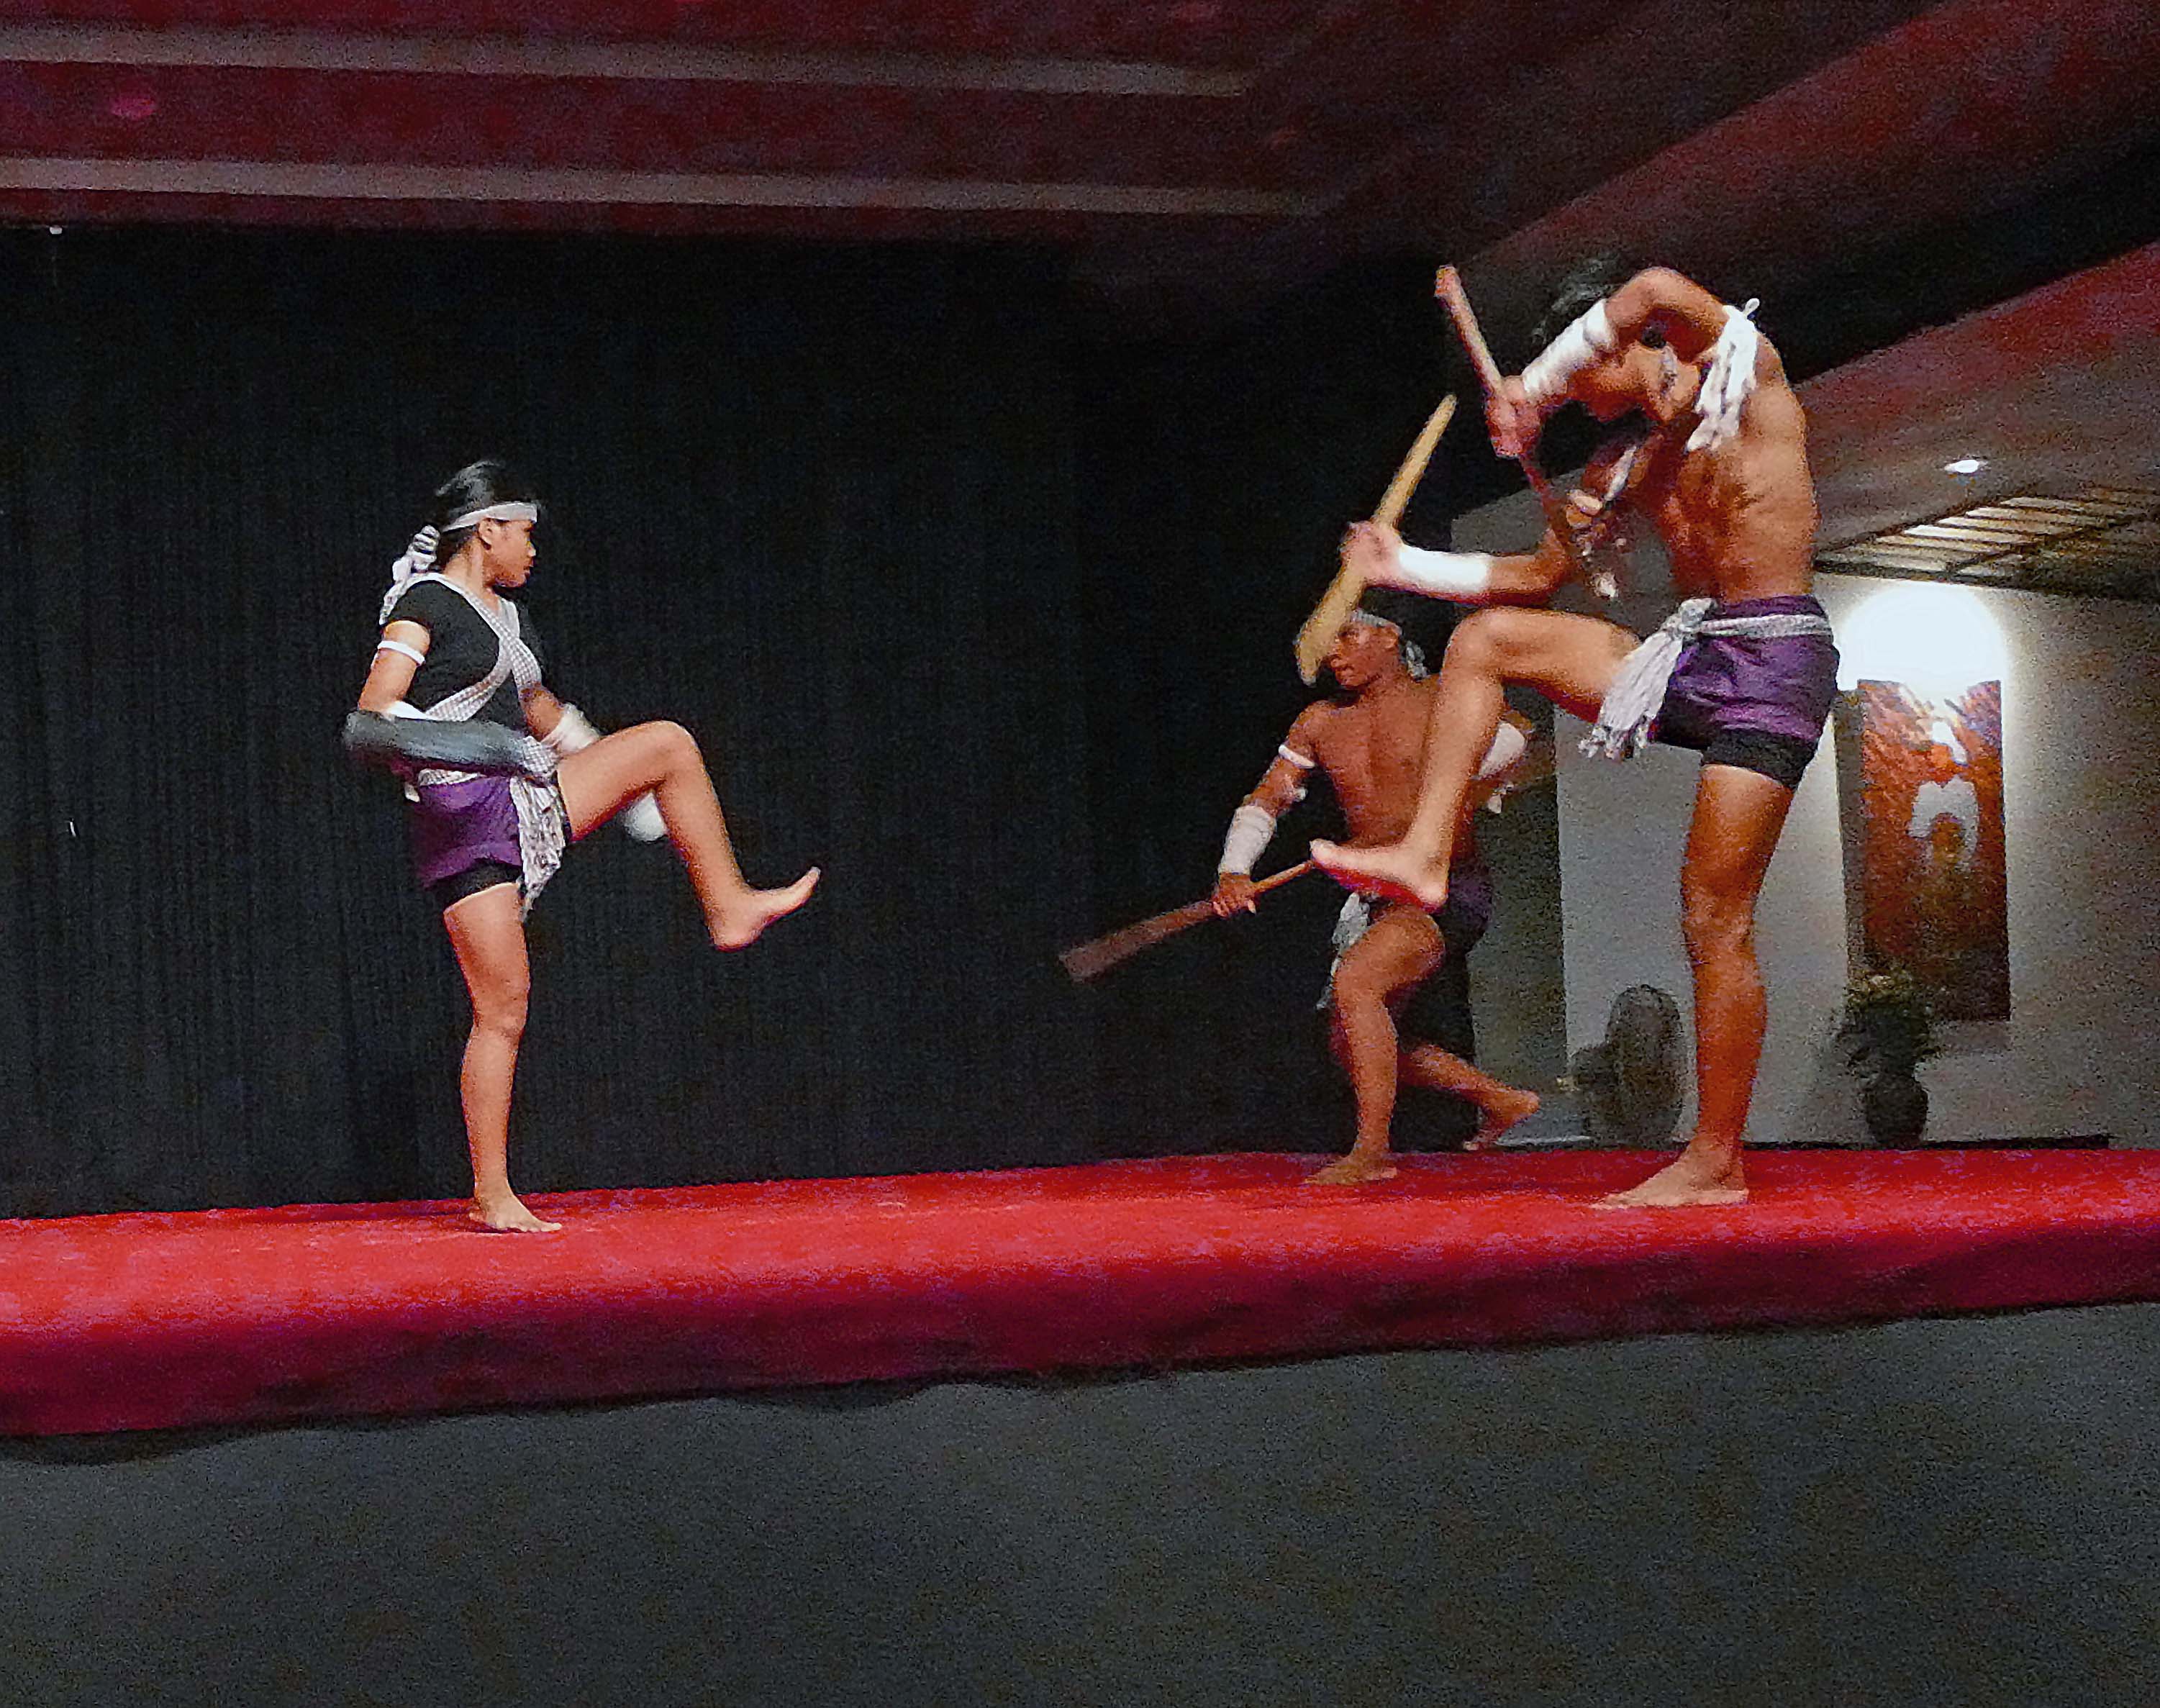 Khmer Kickboxing performed as a dance